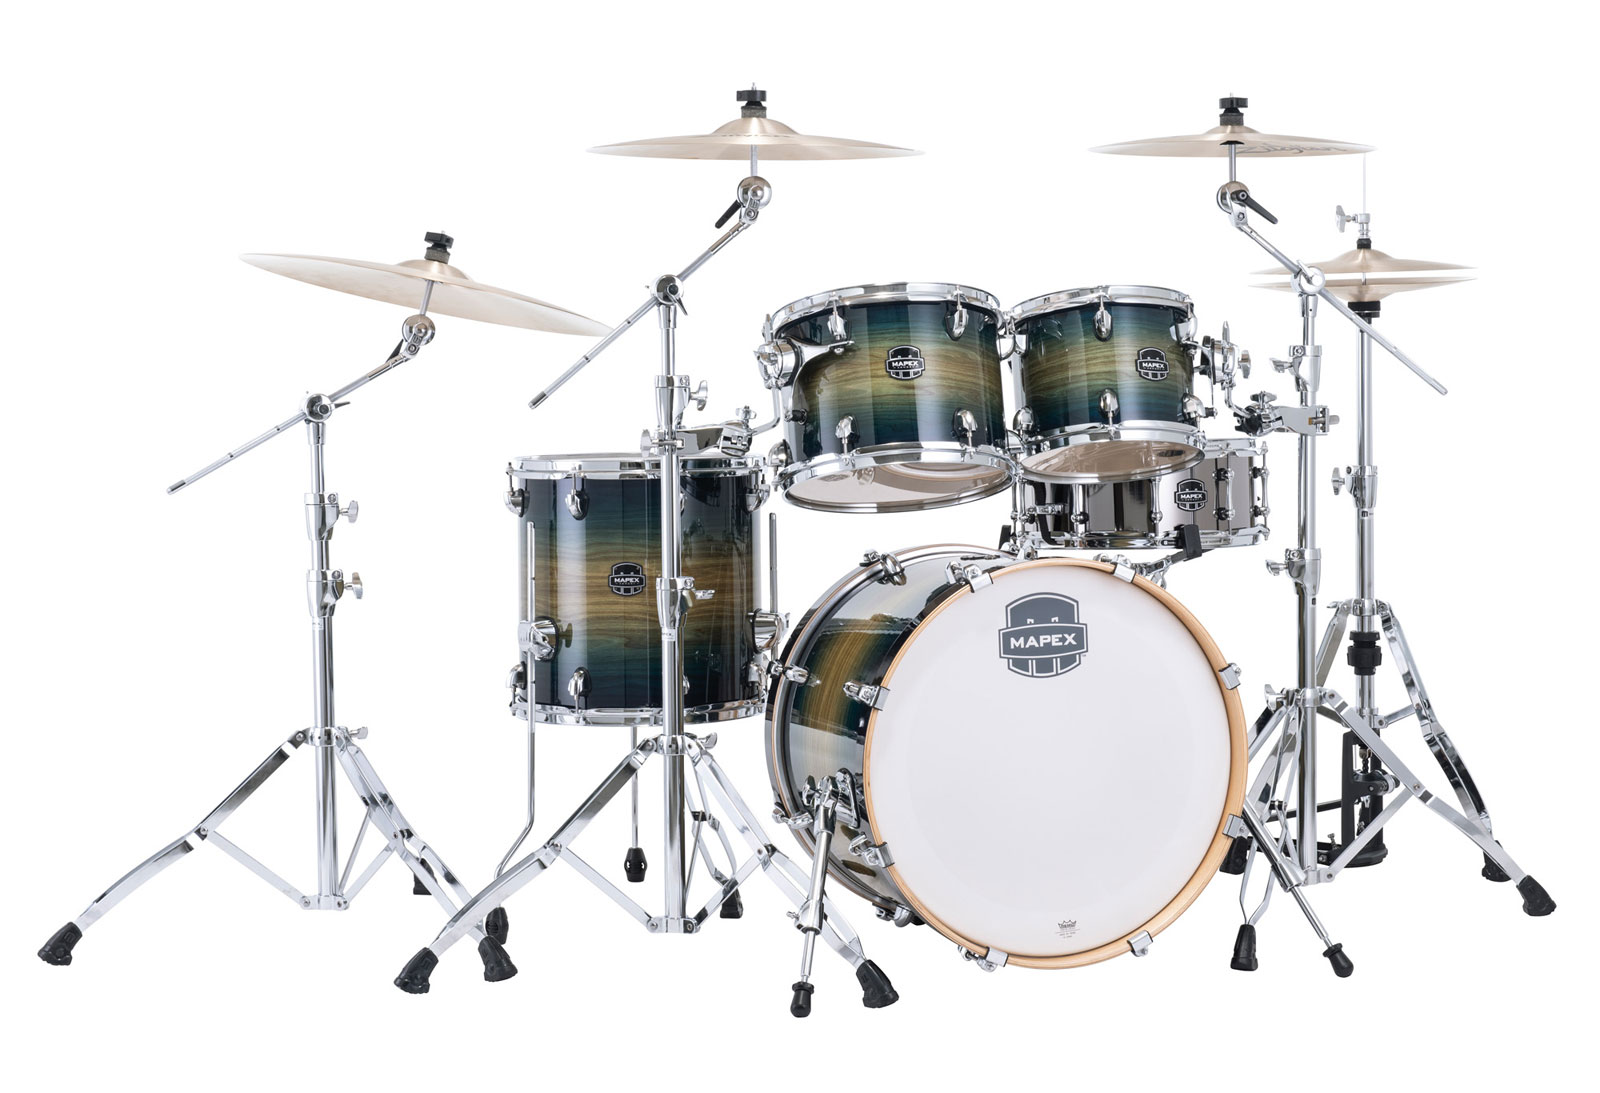 MAPEX ARMORY FUSION 5 DRUMS RAIN FOREST BURST